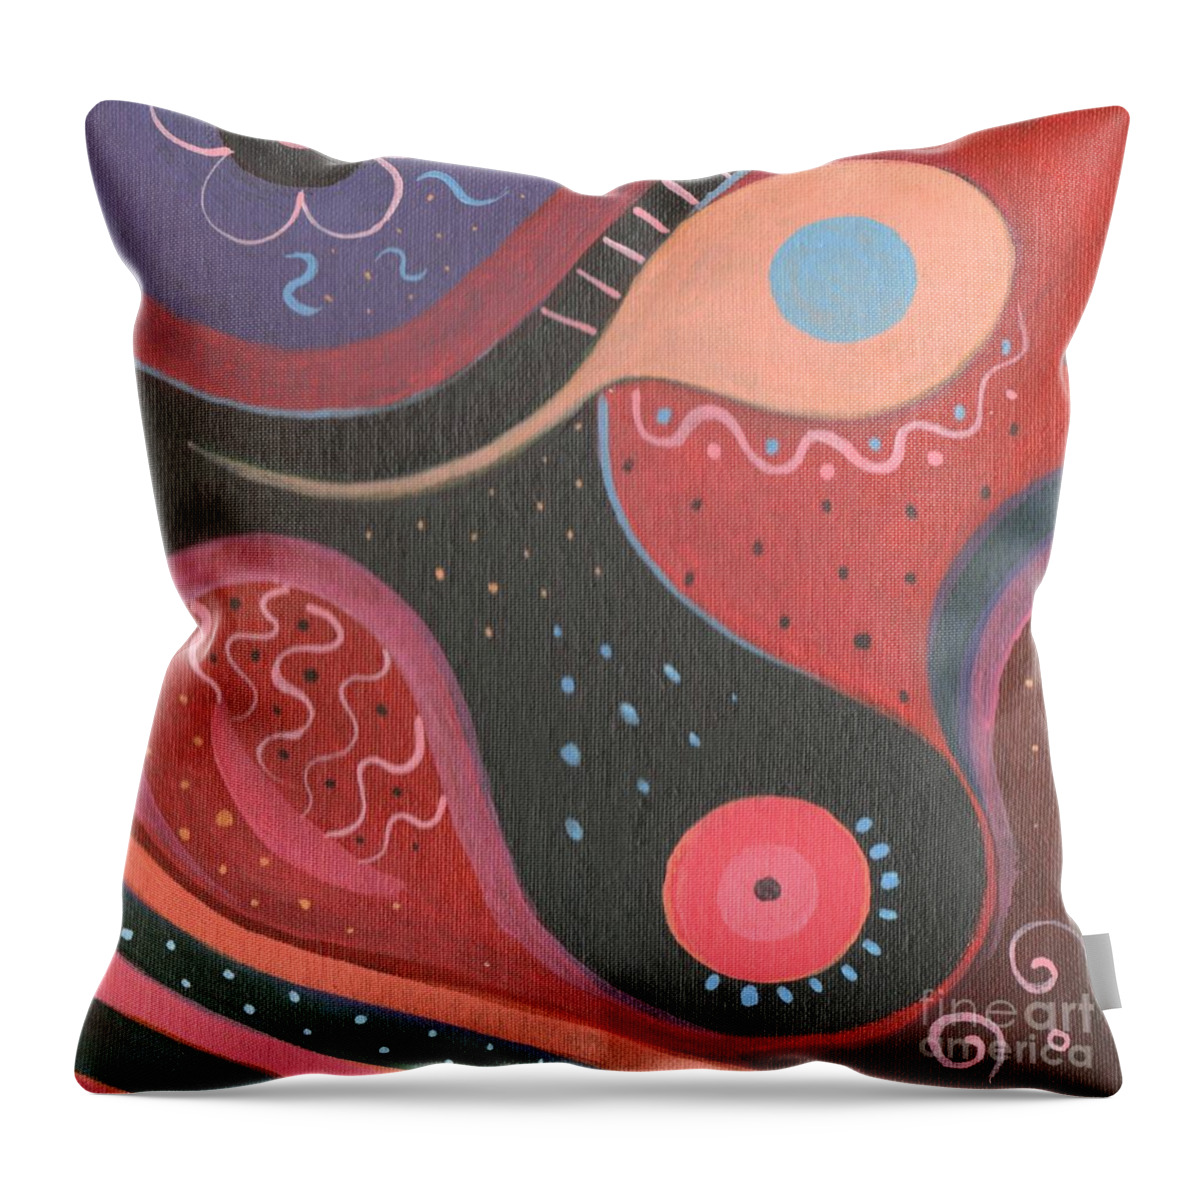 The Joy Of Design Lxviii Part 2 By Helena Tiainen Throw Pillow featuring the painting The Joy of Design LXVIII Part 2 by Helena Tiainen